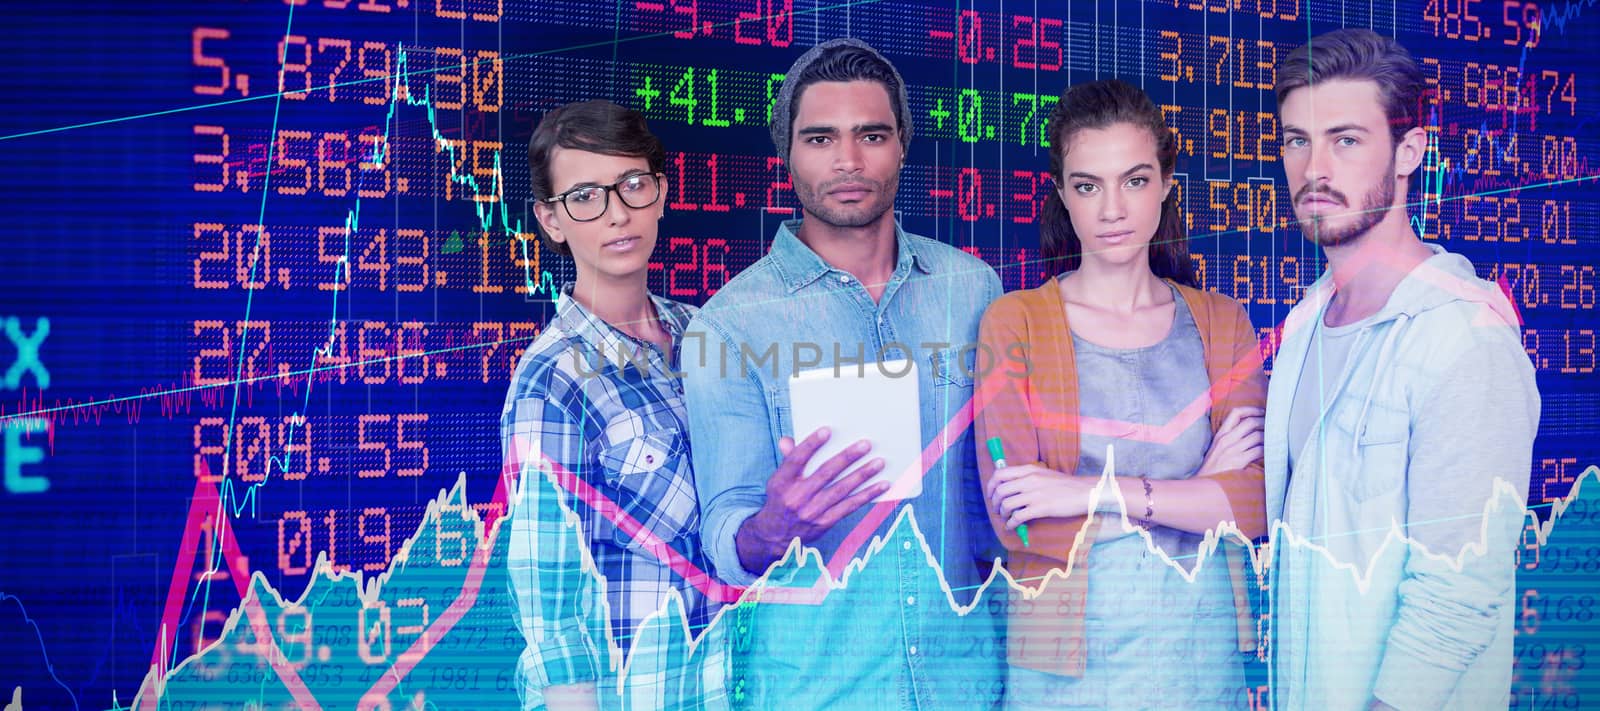 Portrait of business people standing against white background against stocks and shares